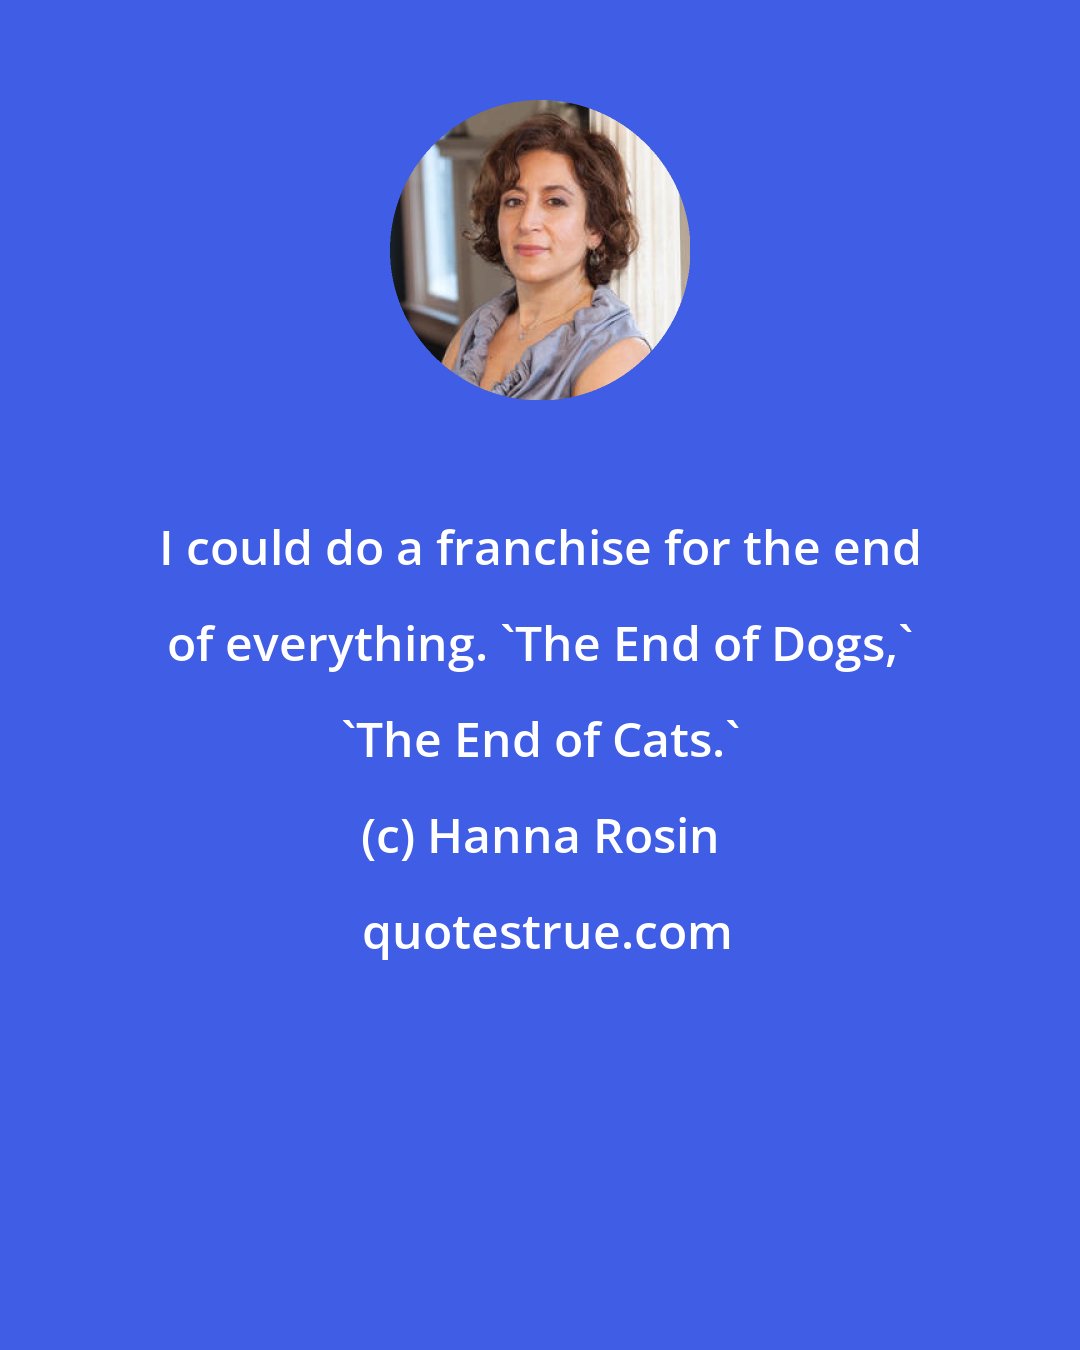 Hanna Rosin: I could do a franchise for the end of everything. 'The End of Dogs,' 'The End of Cats.'